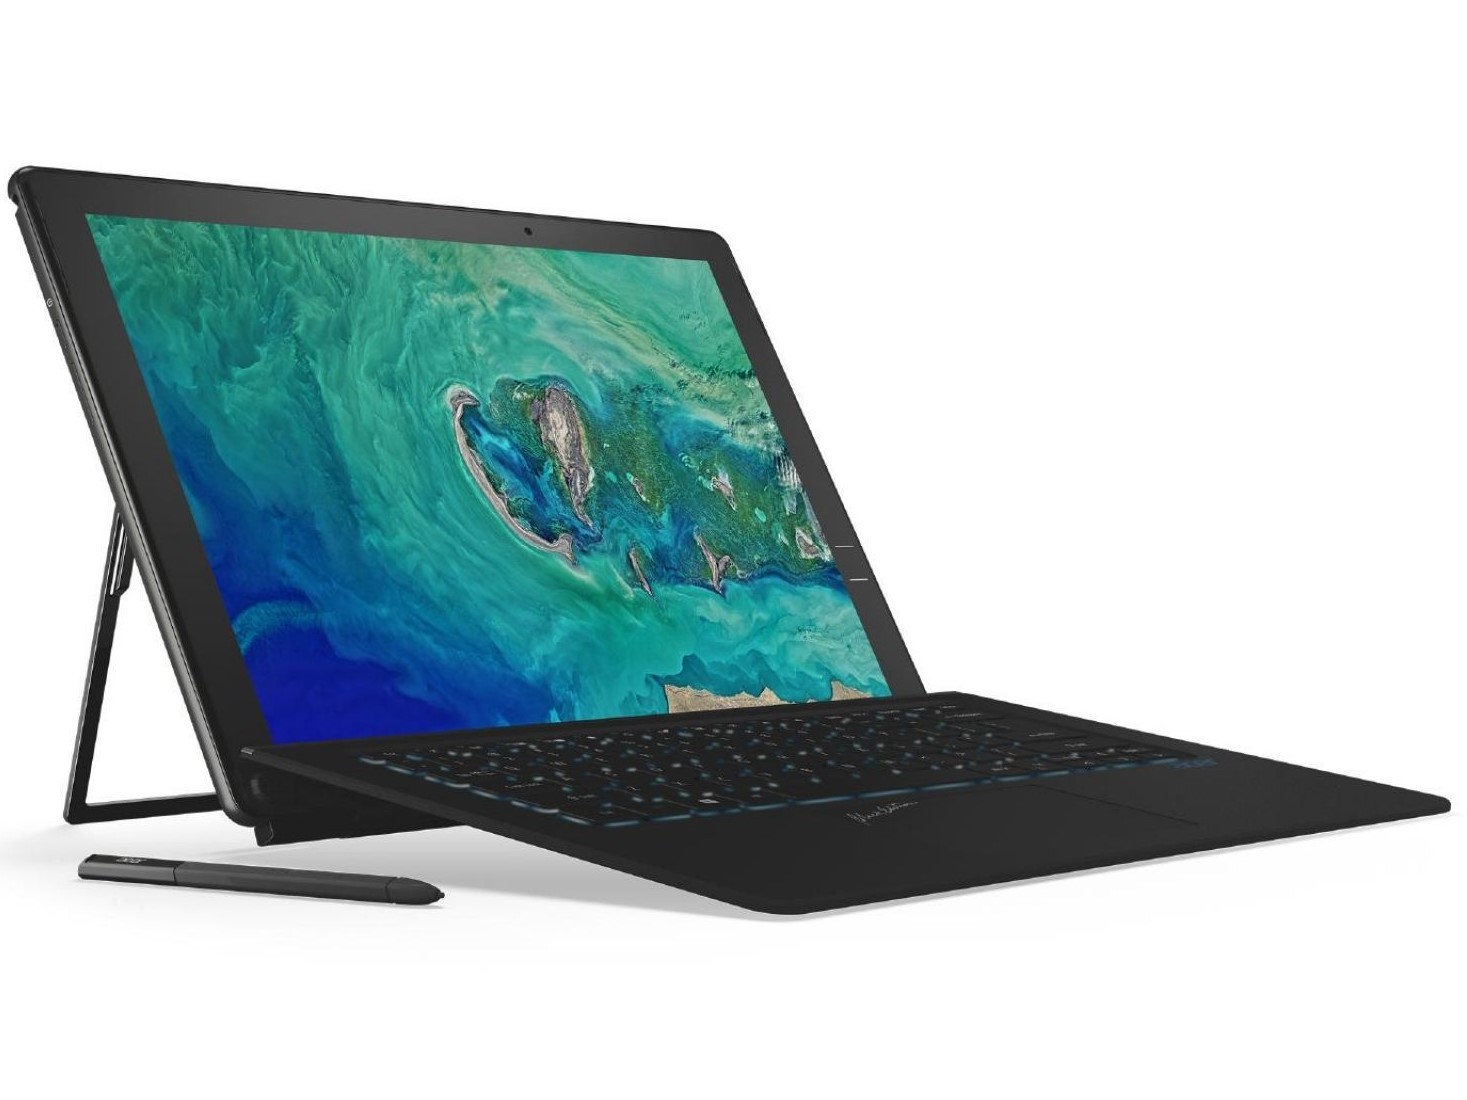 Acer Switch 7 Black Edition (i7-8550U, MX150) Convertible Review